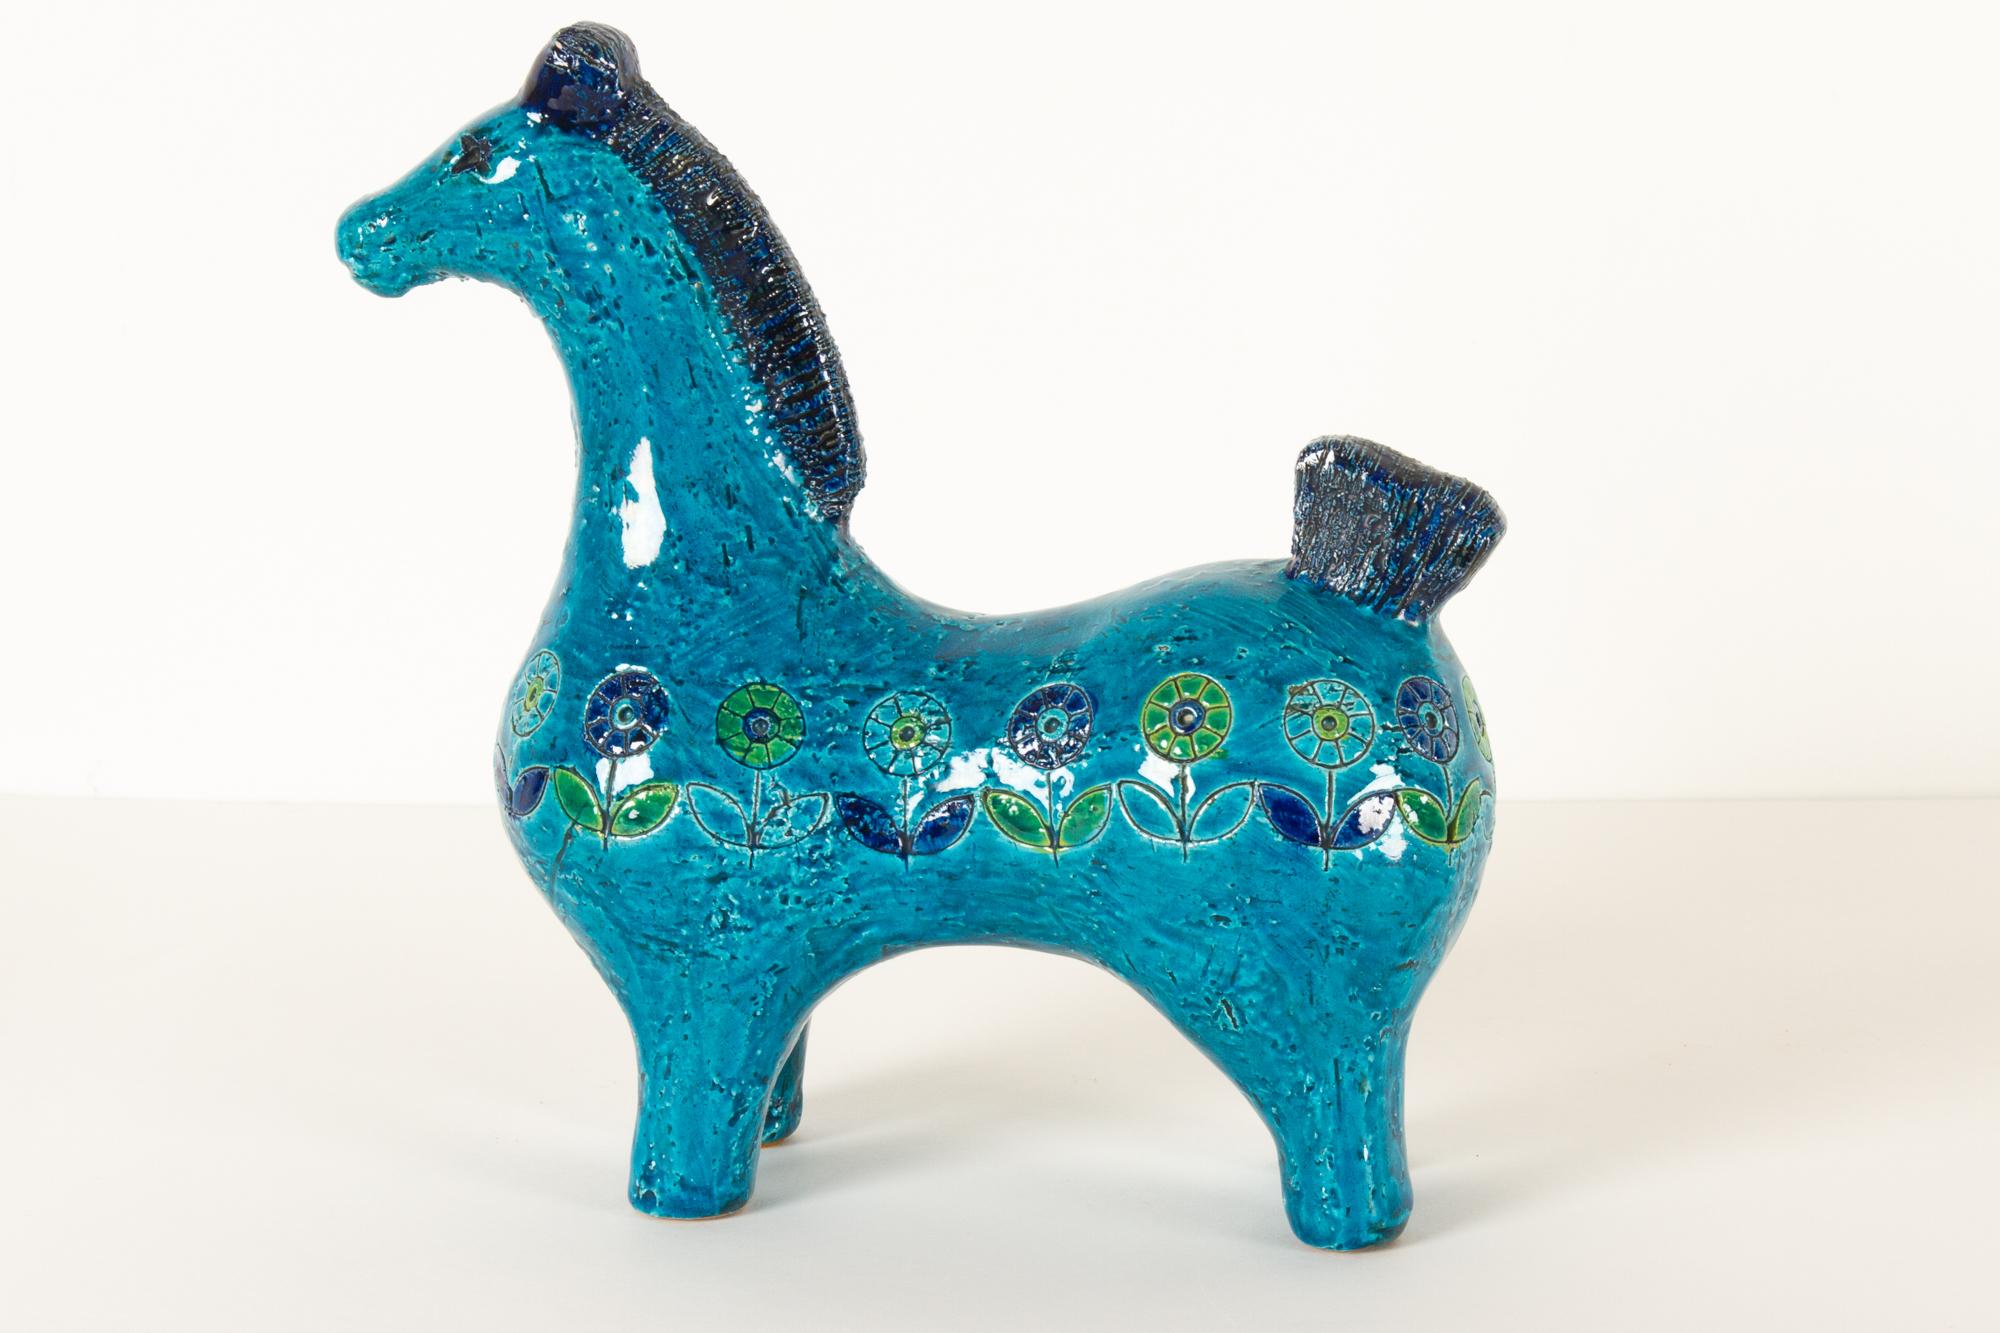 Vintage Italian ceramic horse figurine by Aldo Londi for Bitossi 1960s
Rare Italian Mid-Century Modern horse sculpture in Rimini blue glace with floral pattern created by Aldo Londi. This particular figurine is not often seen but is has the very